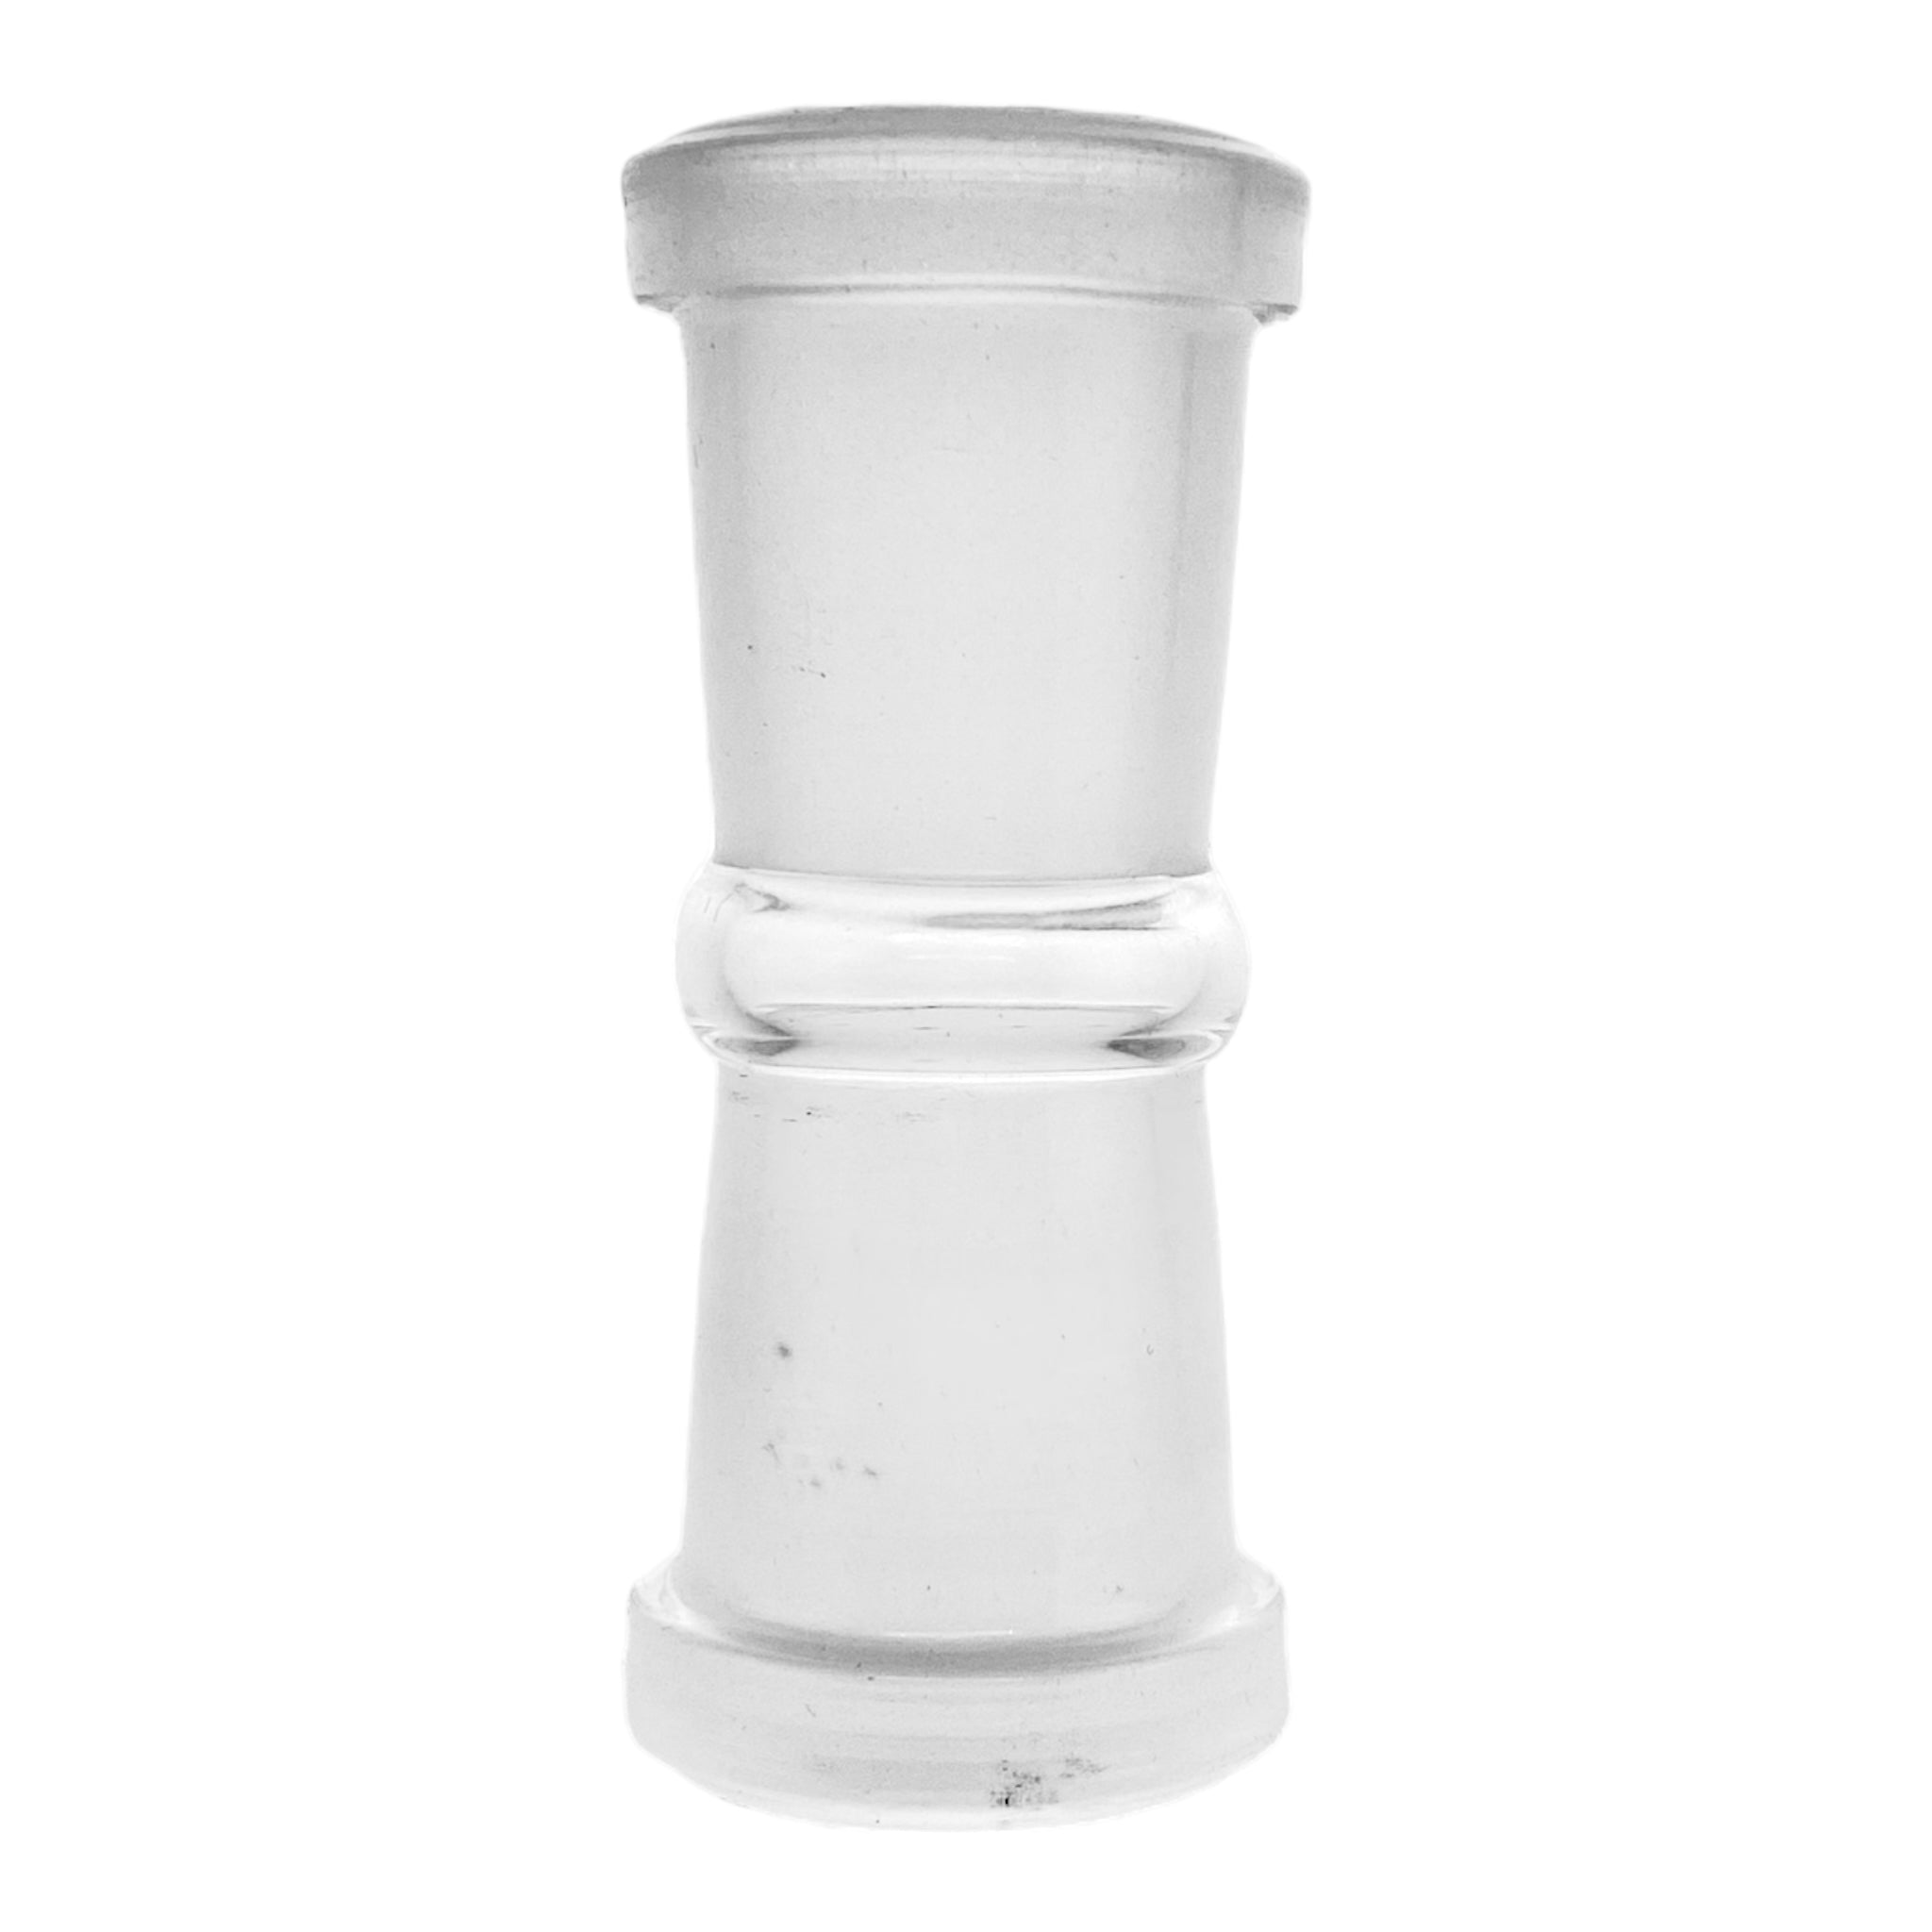 Glass Adapter For Bongs And Dab Rigs - 18MM Female - 18MM Female